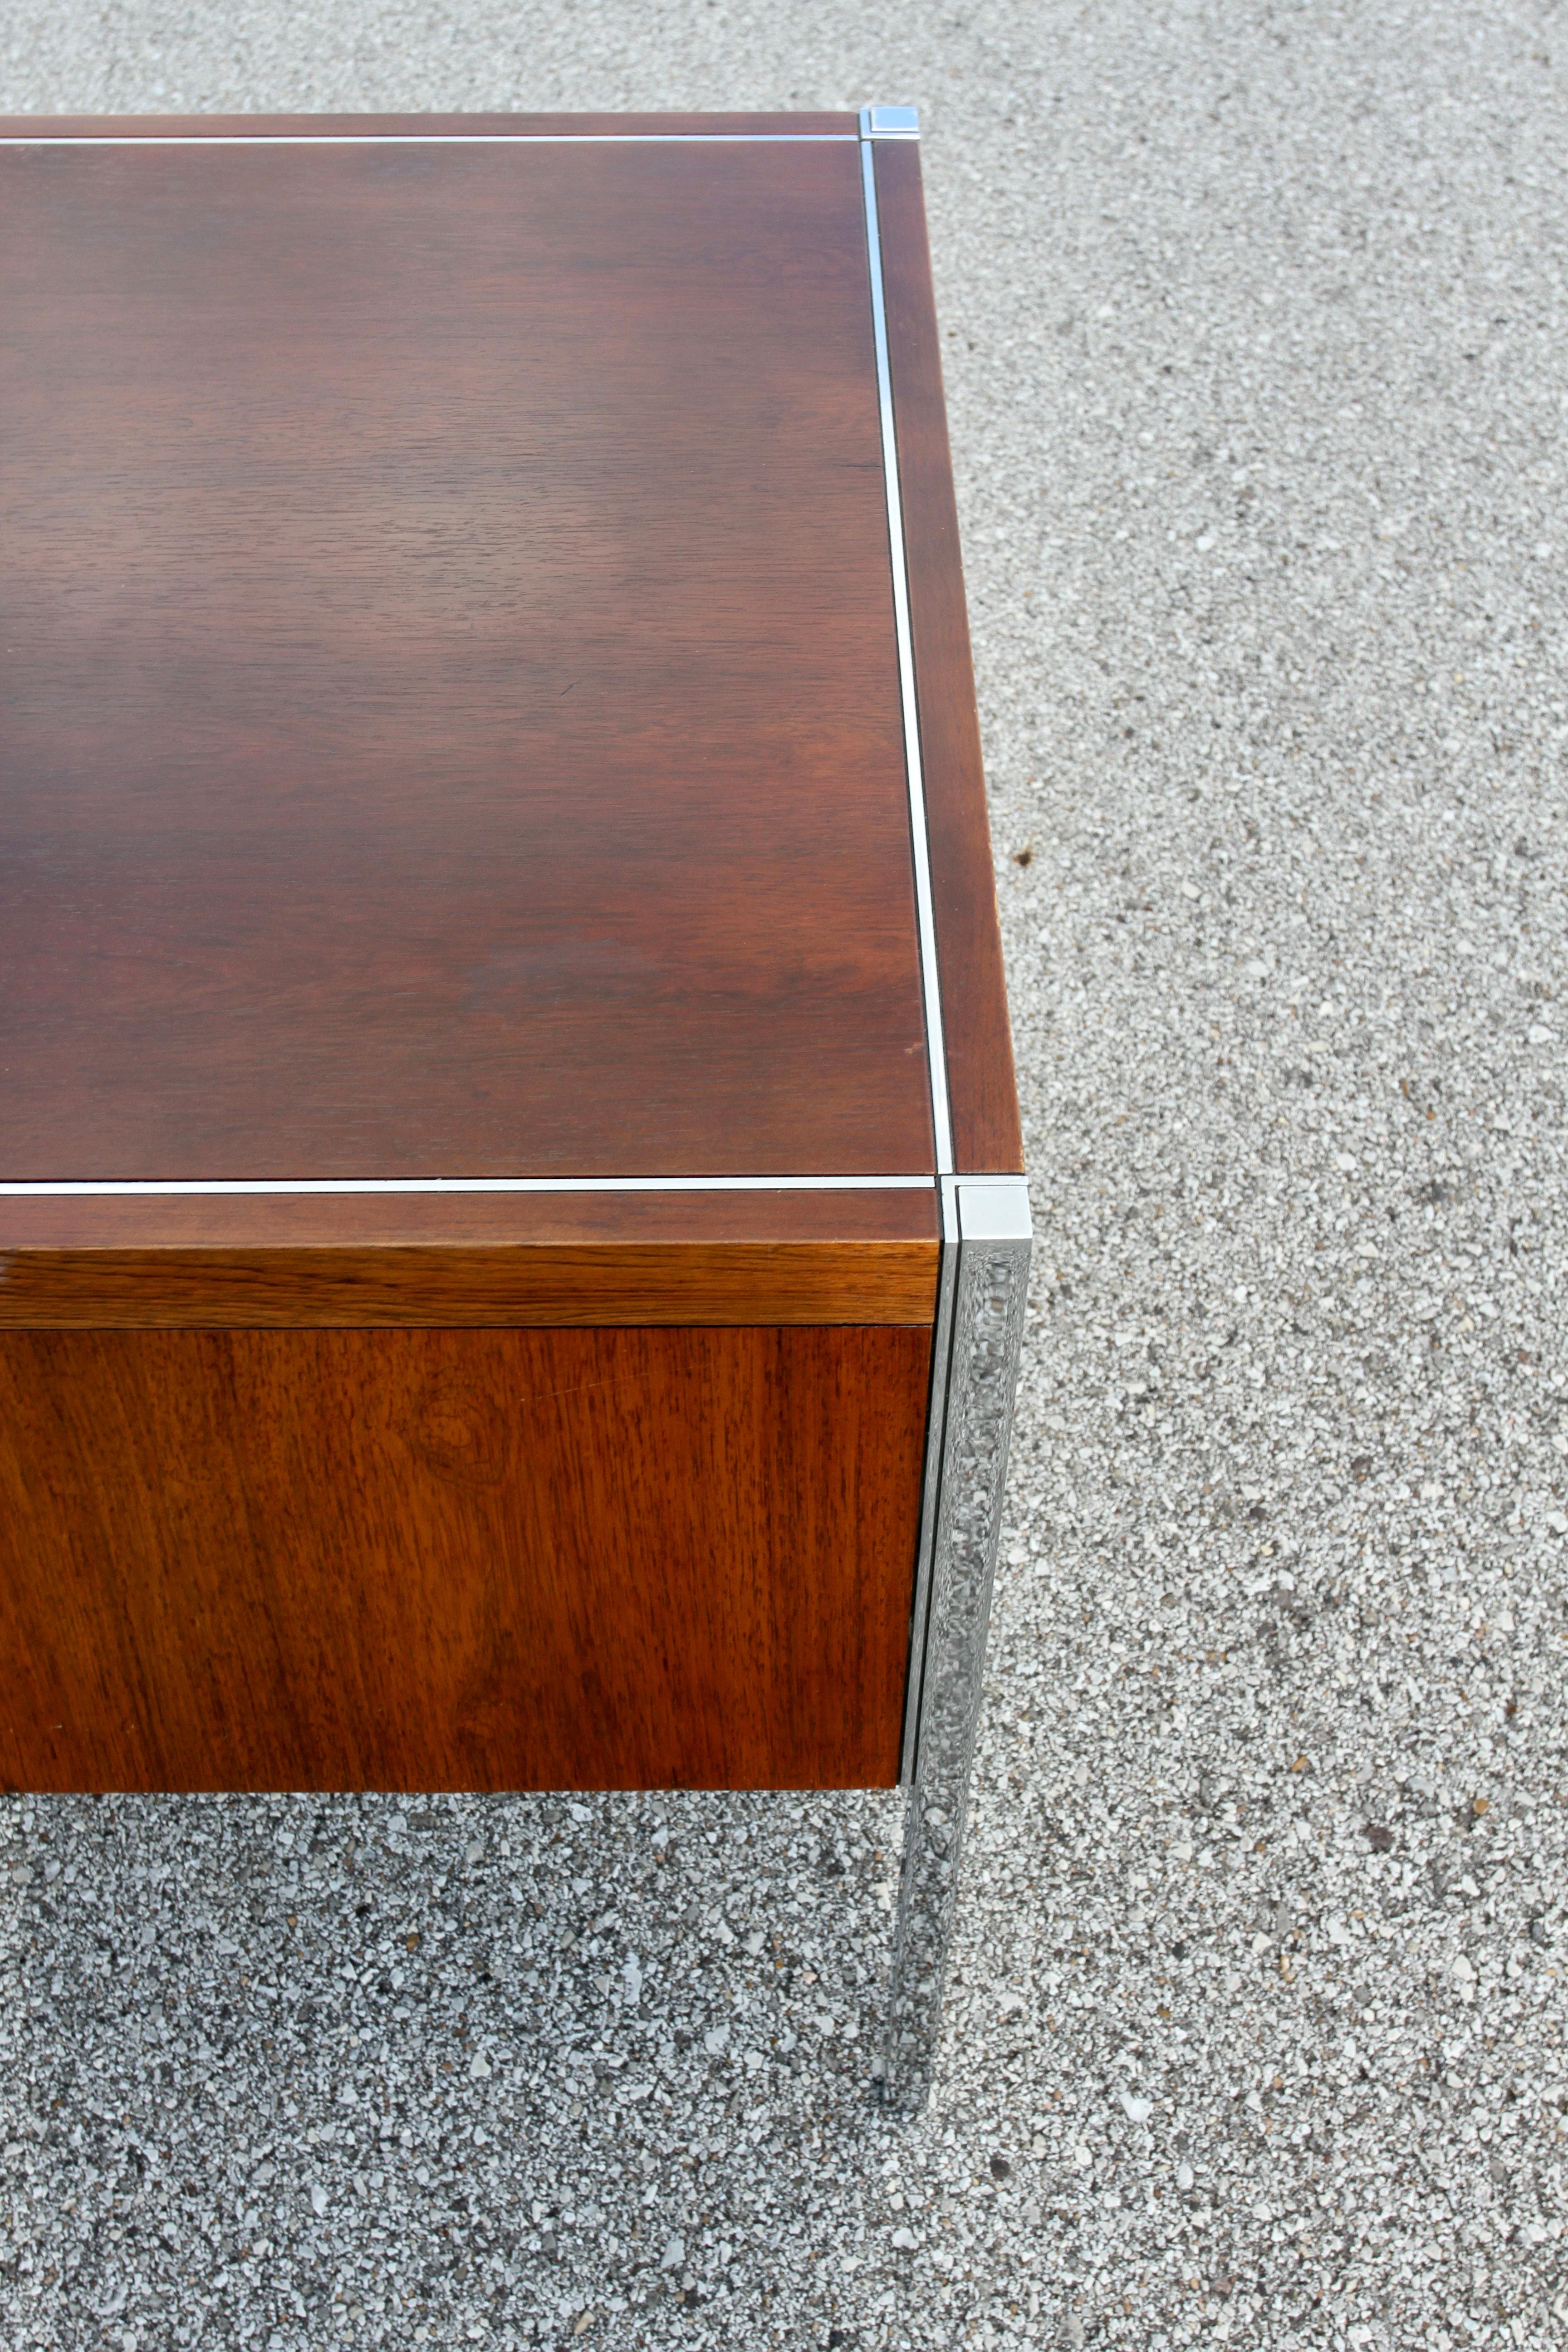 Richard Schultz for Knoll 1960s Mid-Century Modern Rosewood Executive Desk #4146 For Sale 5